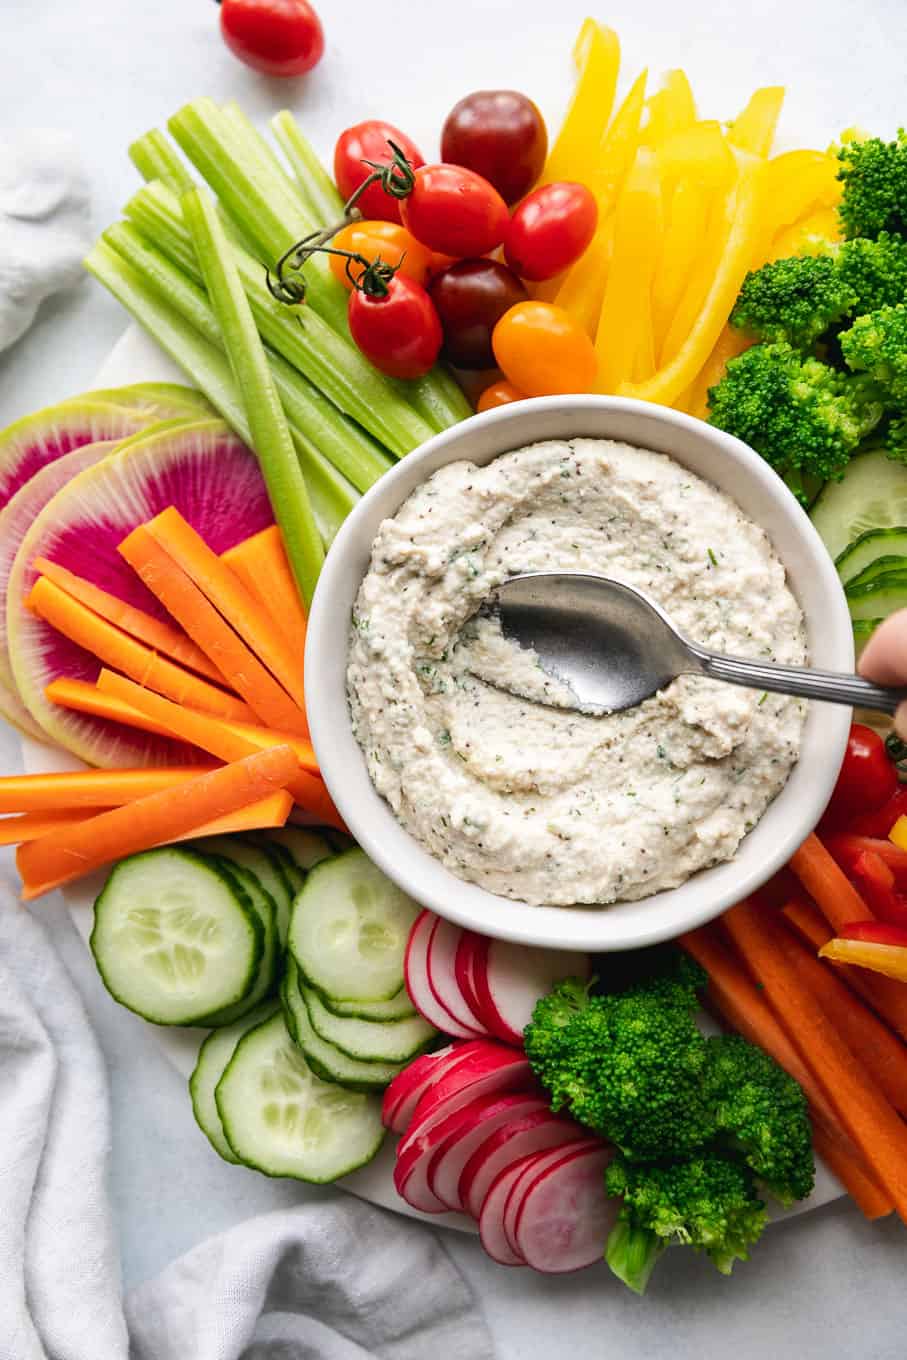 This is an overhead image of a white bowl filled with a creamy dip. Around the dip are fresh veggies like cut peppers, radish, carrots, cucumbers, and celery. A spoon is spreading the dip out in the bowl.